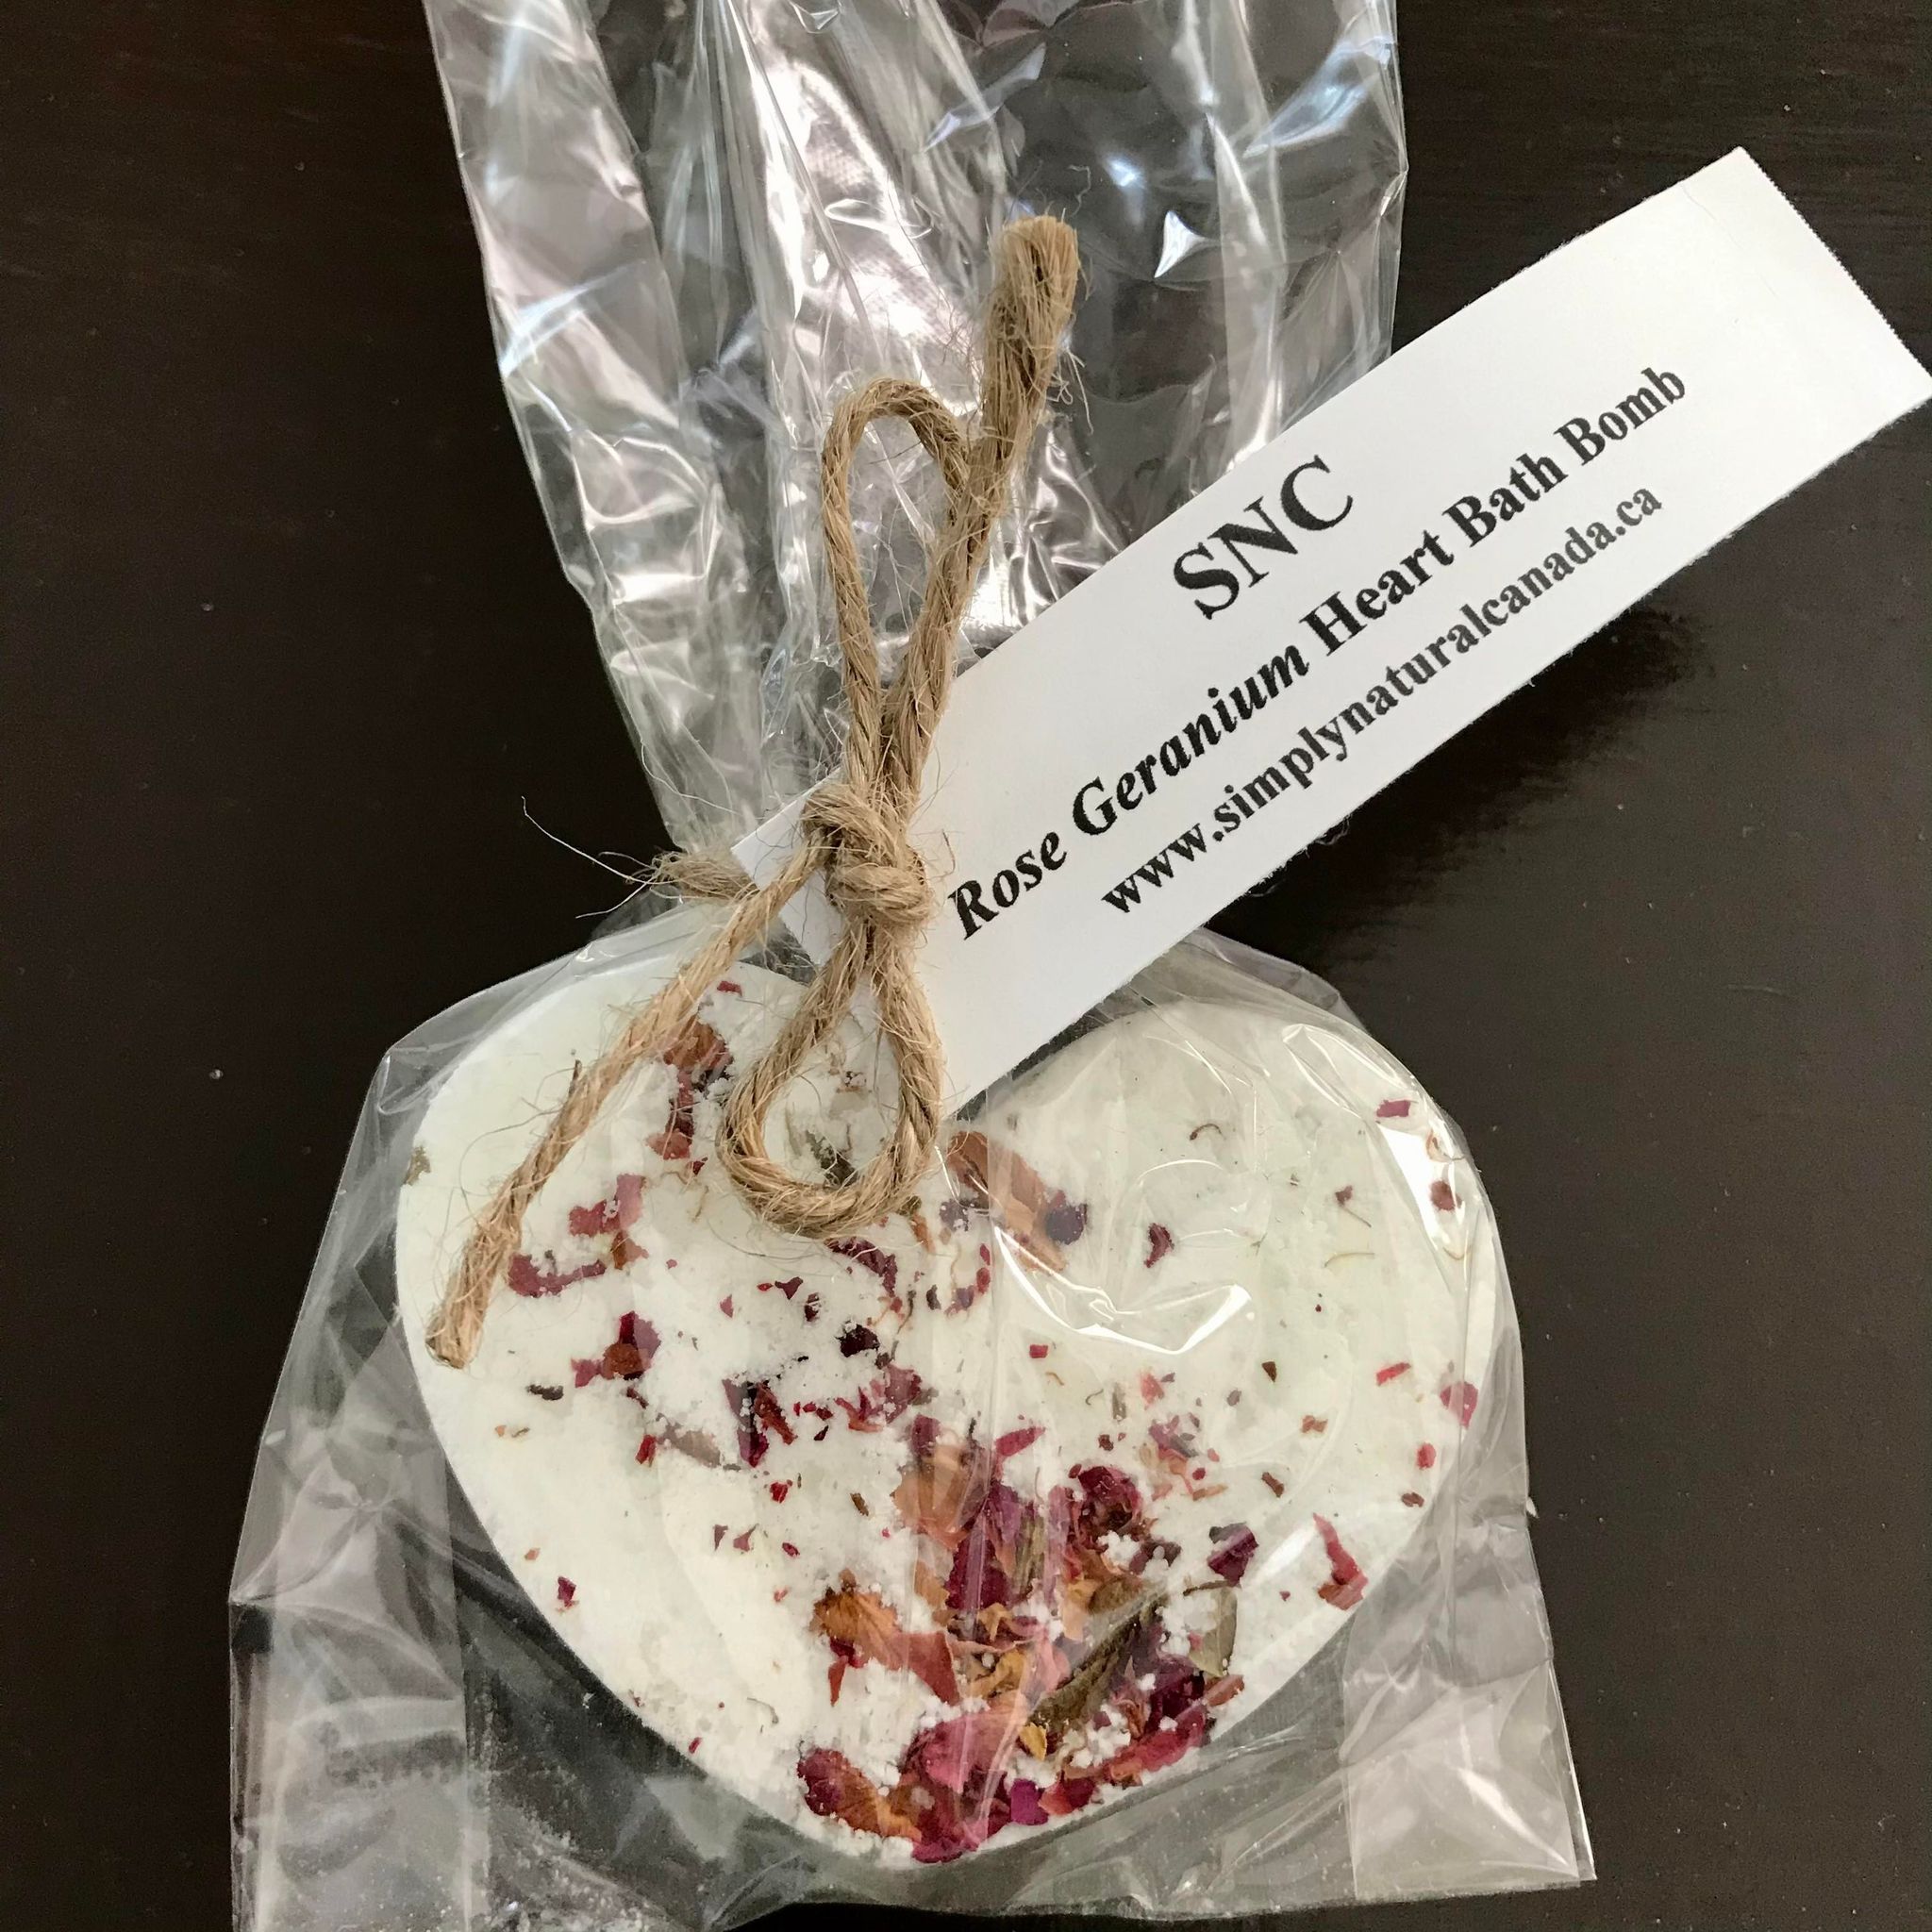 rose geranium full bath sized heart bath bomb with rose petals packaged in a clear compostable bag made in canada by simply natural canada